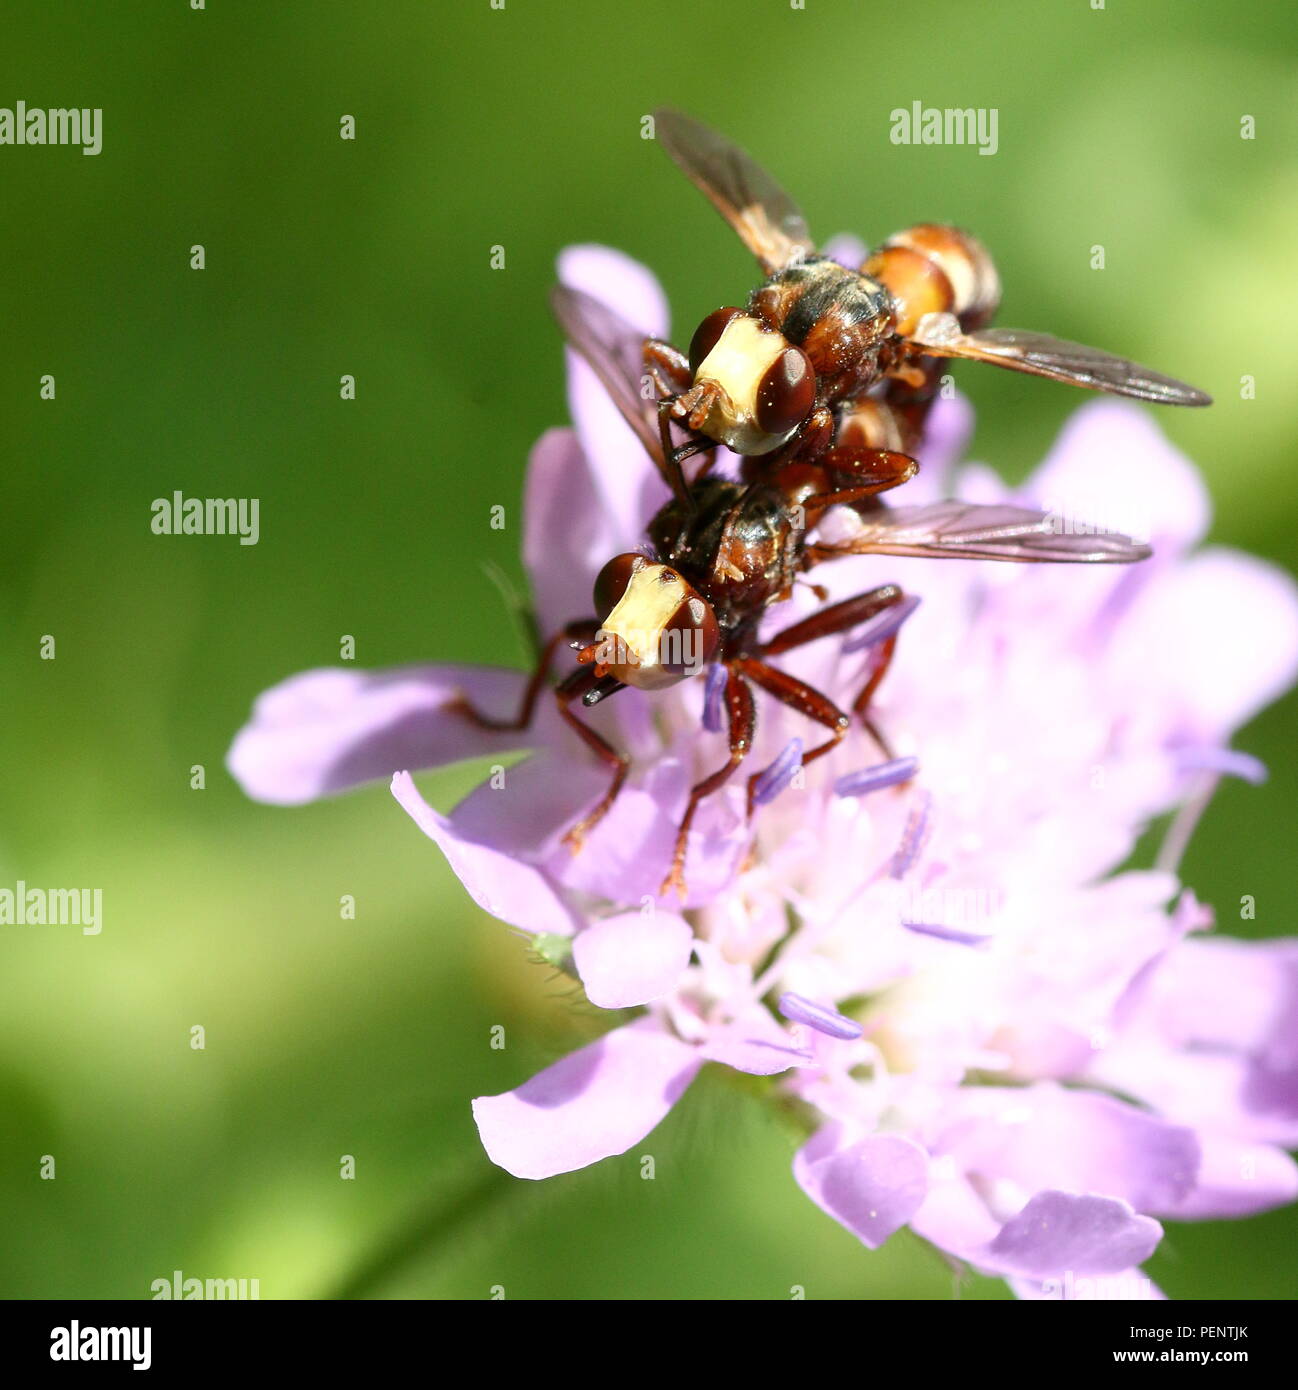 Mating European Common thick-headed Fly (Sicus ferrugineus - Conopidae)  on a pink mist flower Stock Photo